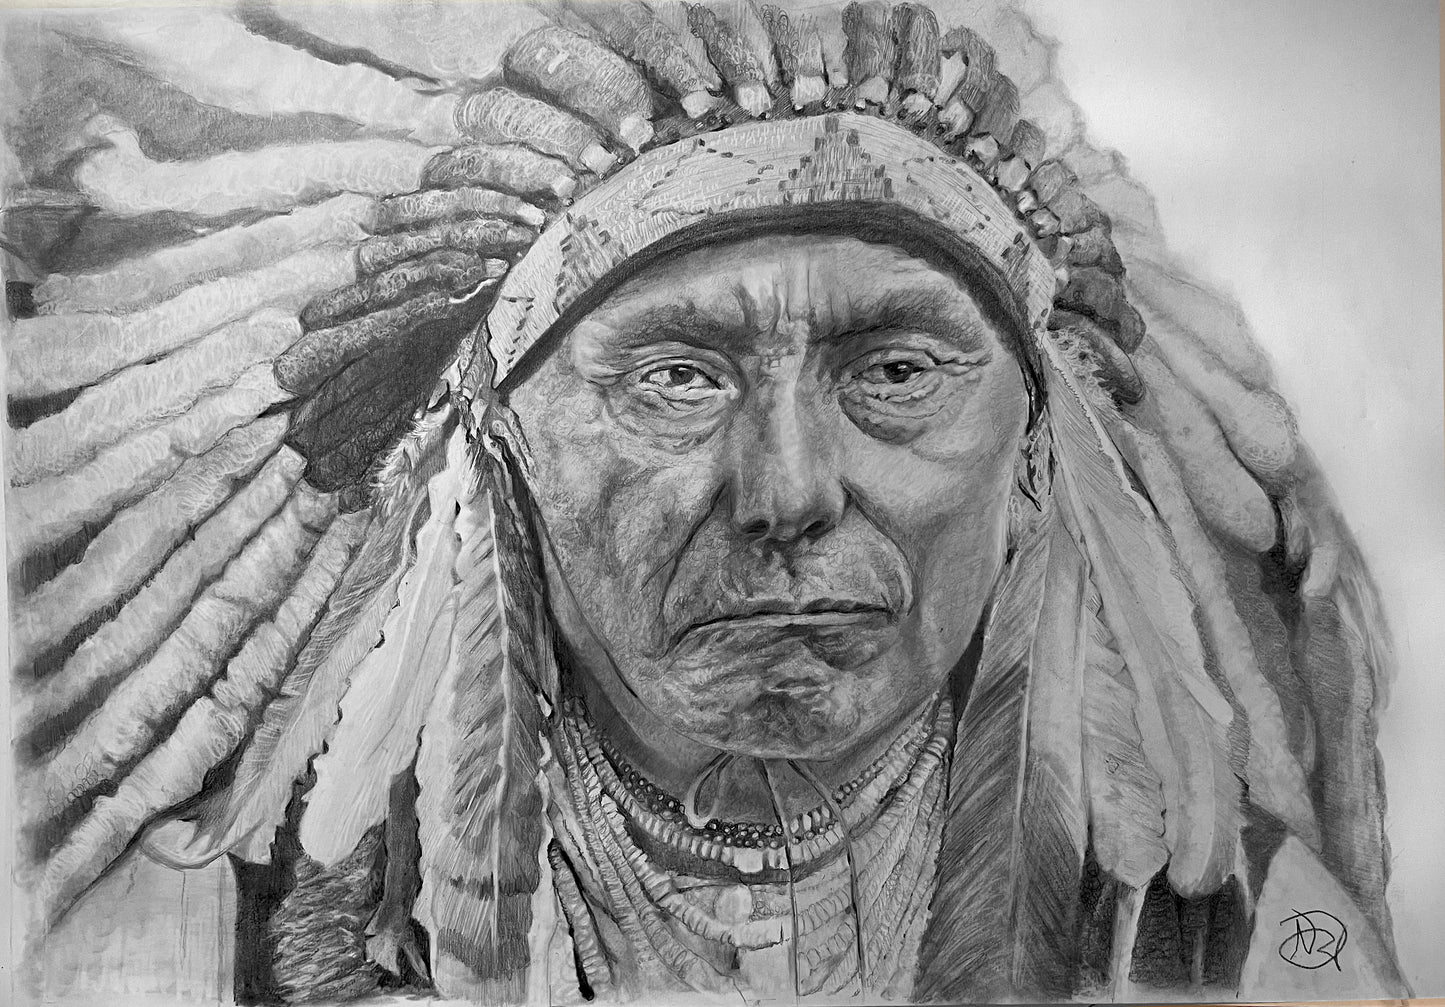 Chief Joseph-"True Chief for his People”